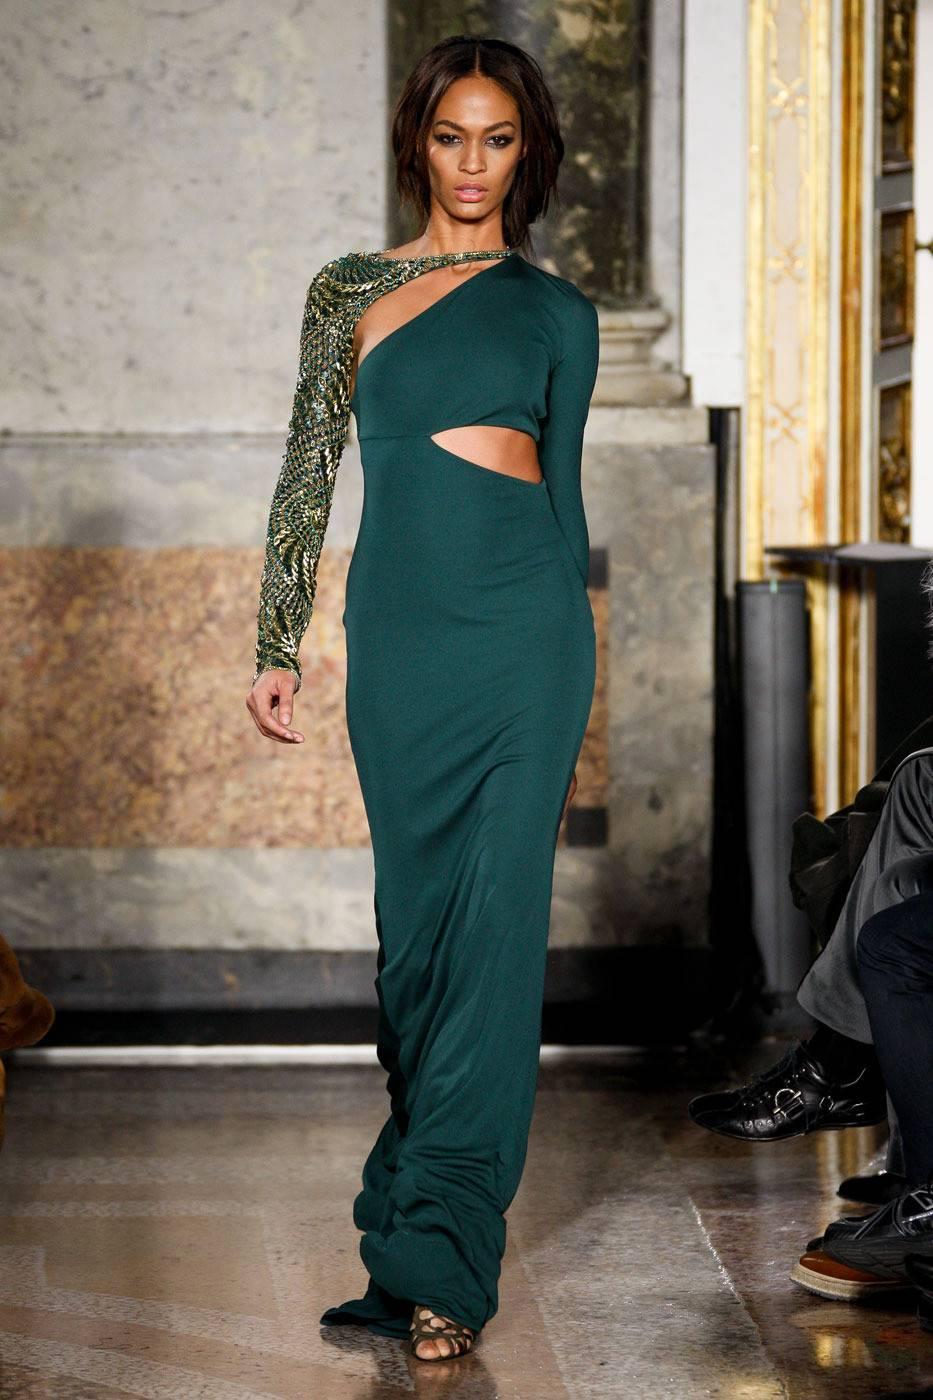 Emilio Pucci Autumn-Winter 2011 emerald green evening gown with embellishment

- midriff cut out
- embellished detachable sleeve and choker 
- Fr 34 / It 38 / UK 6 / Small